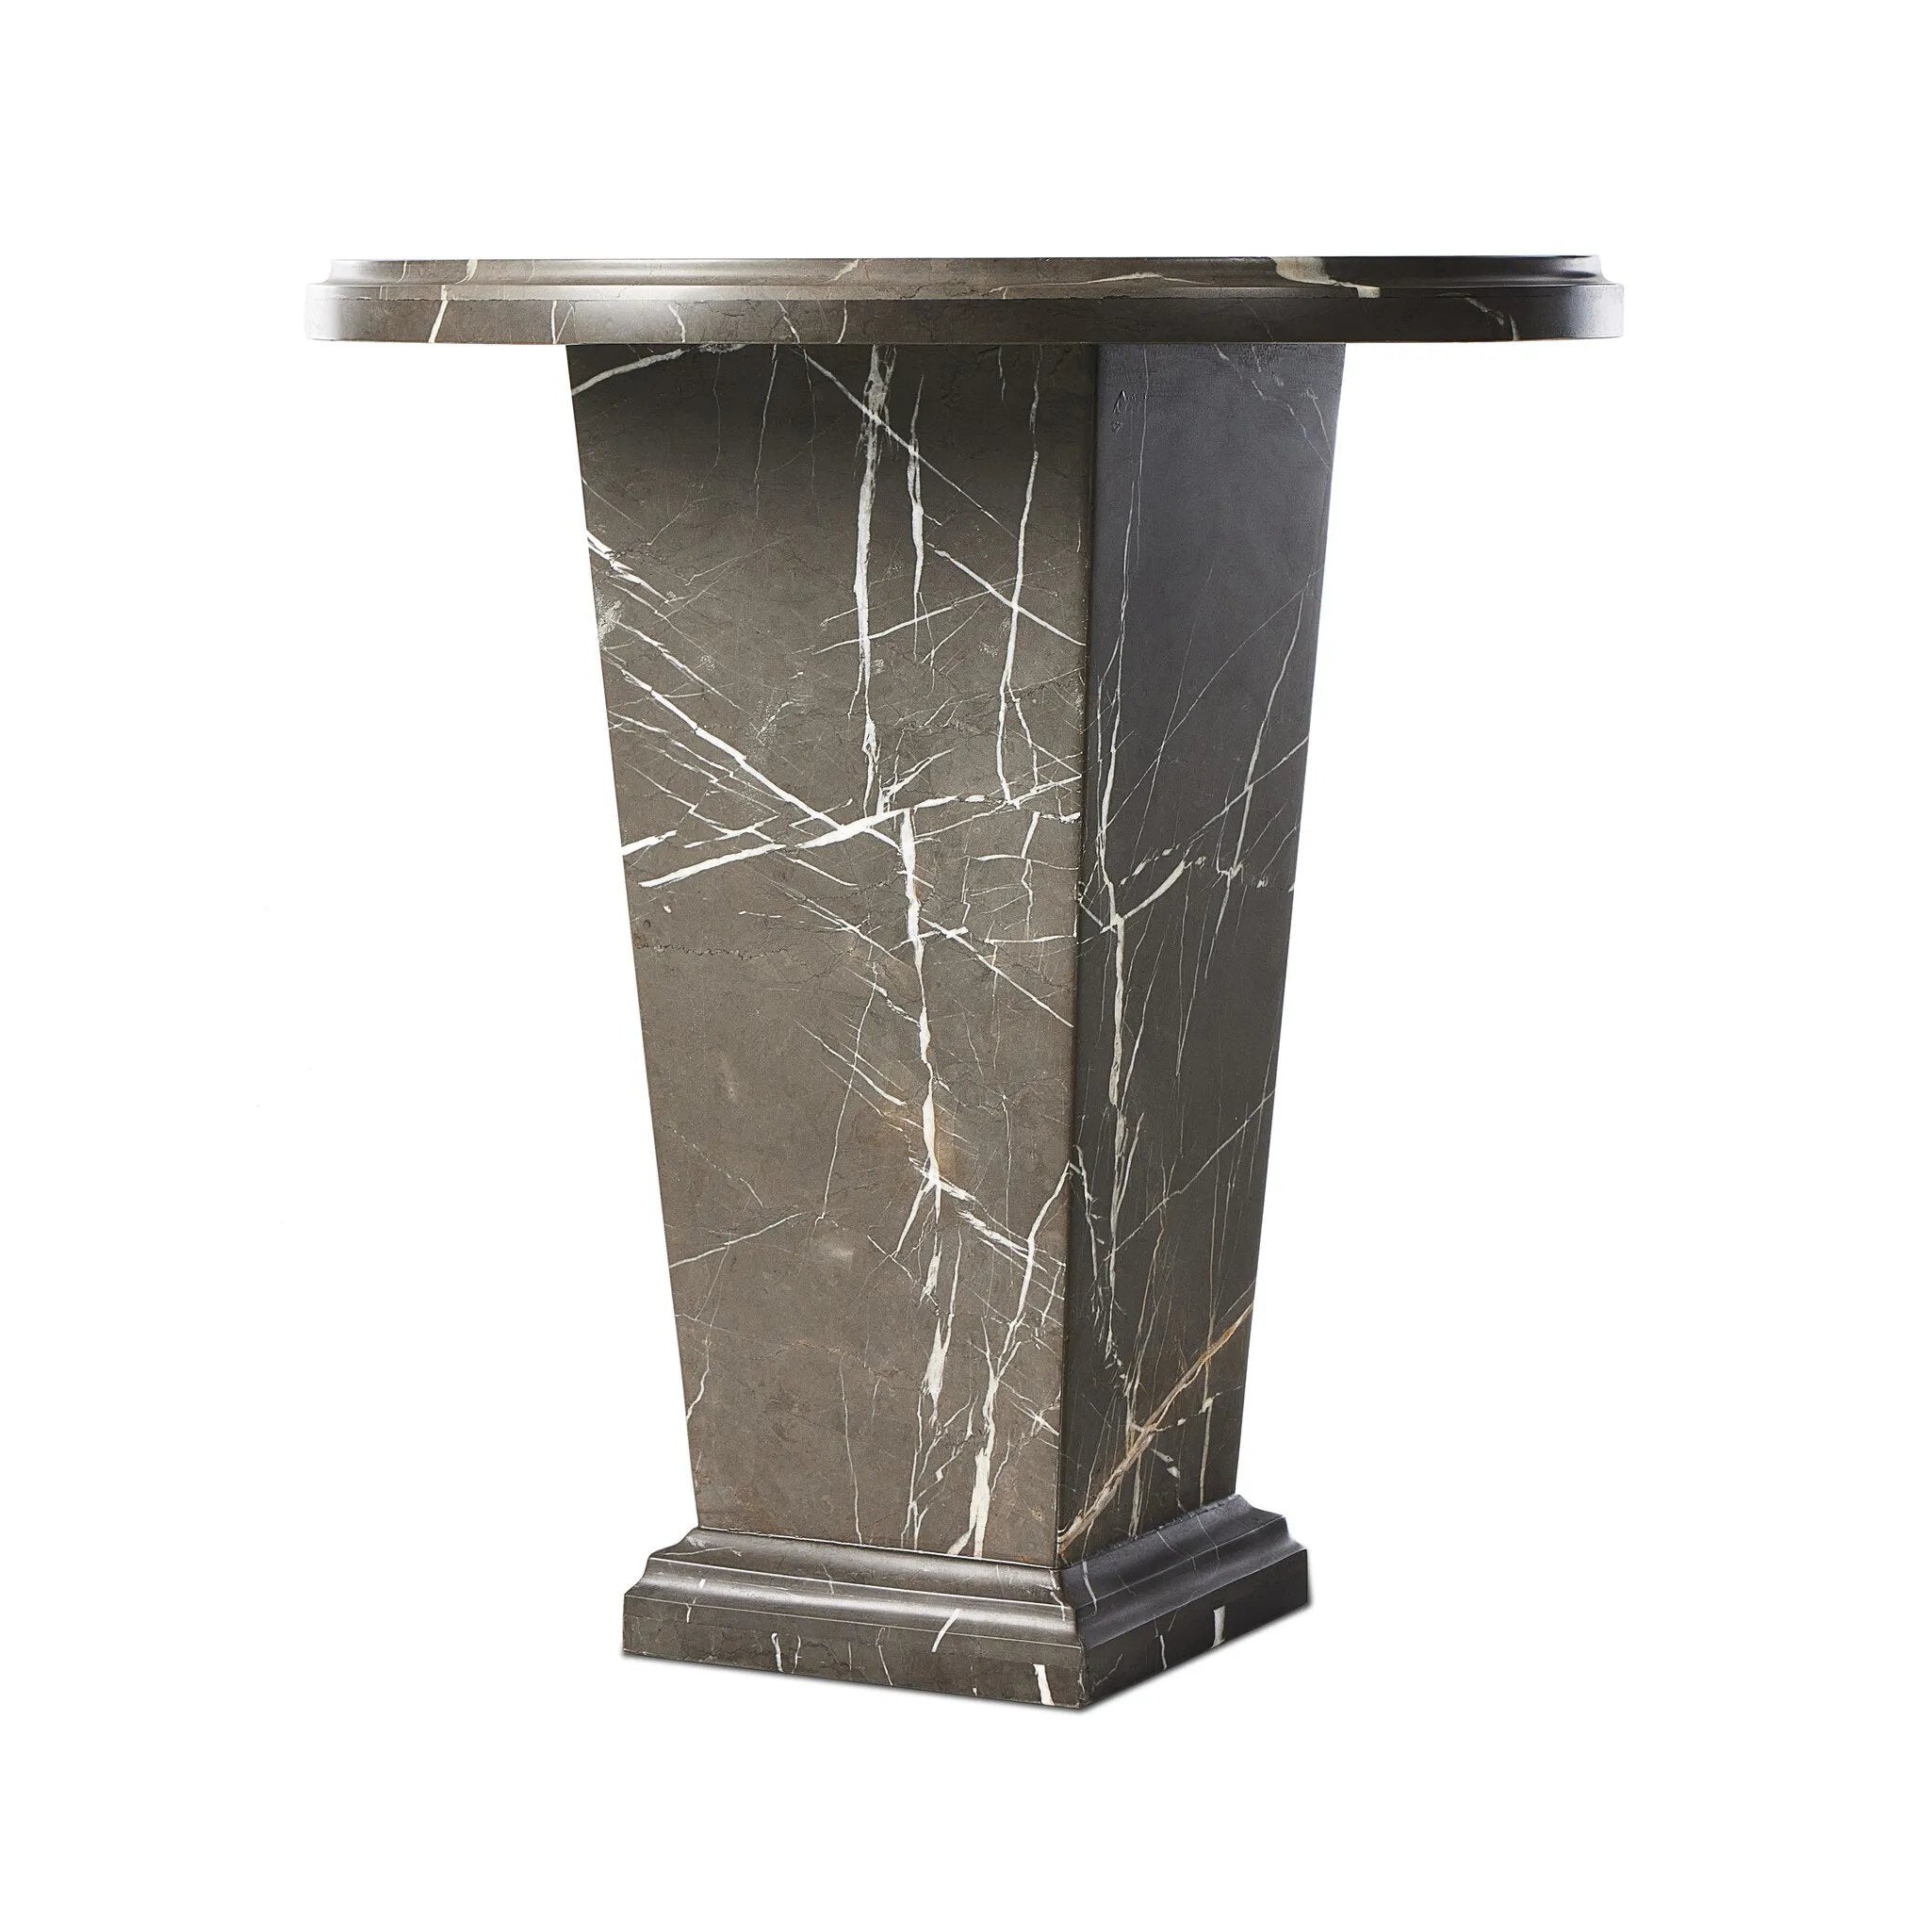 Inspired by Roman columns, a versatile end table of grey Italian marble works a sophisticated touch into any room.Collection: Elemen Amethyst Home provides interior design, new home construction design consulting, vintage area rugs, and lighting in the Charlotte metro area.